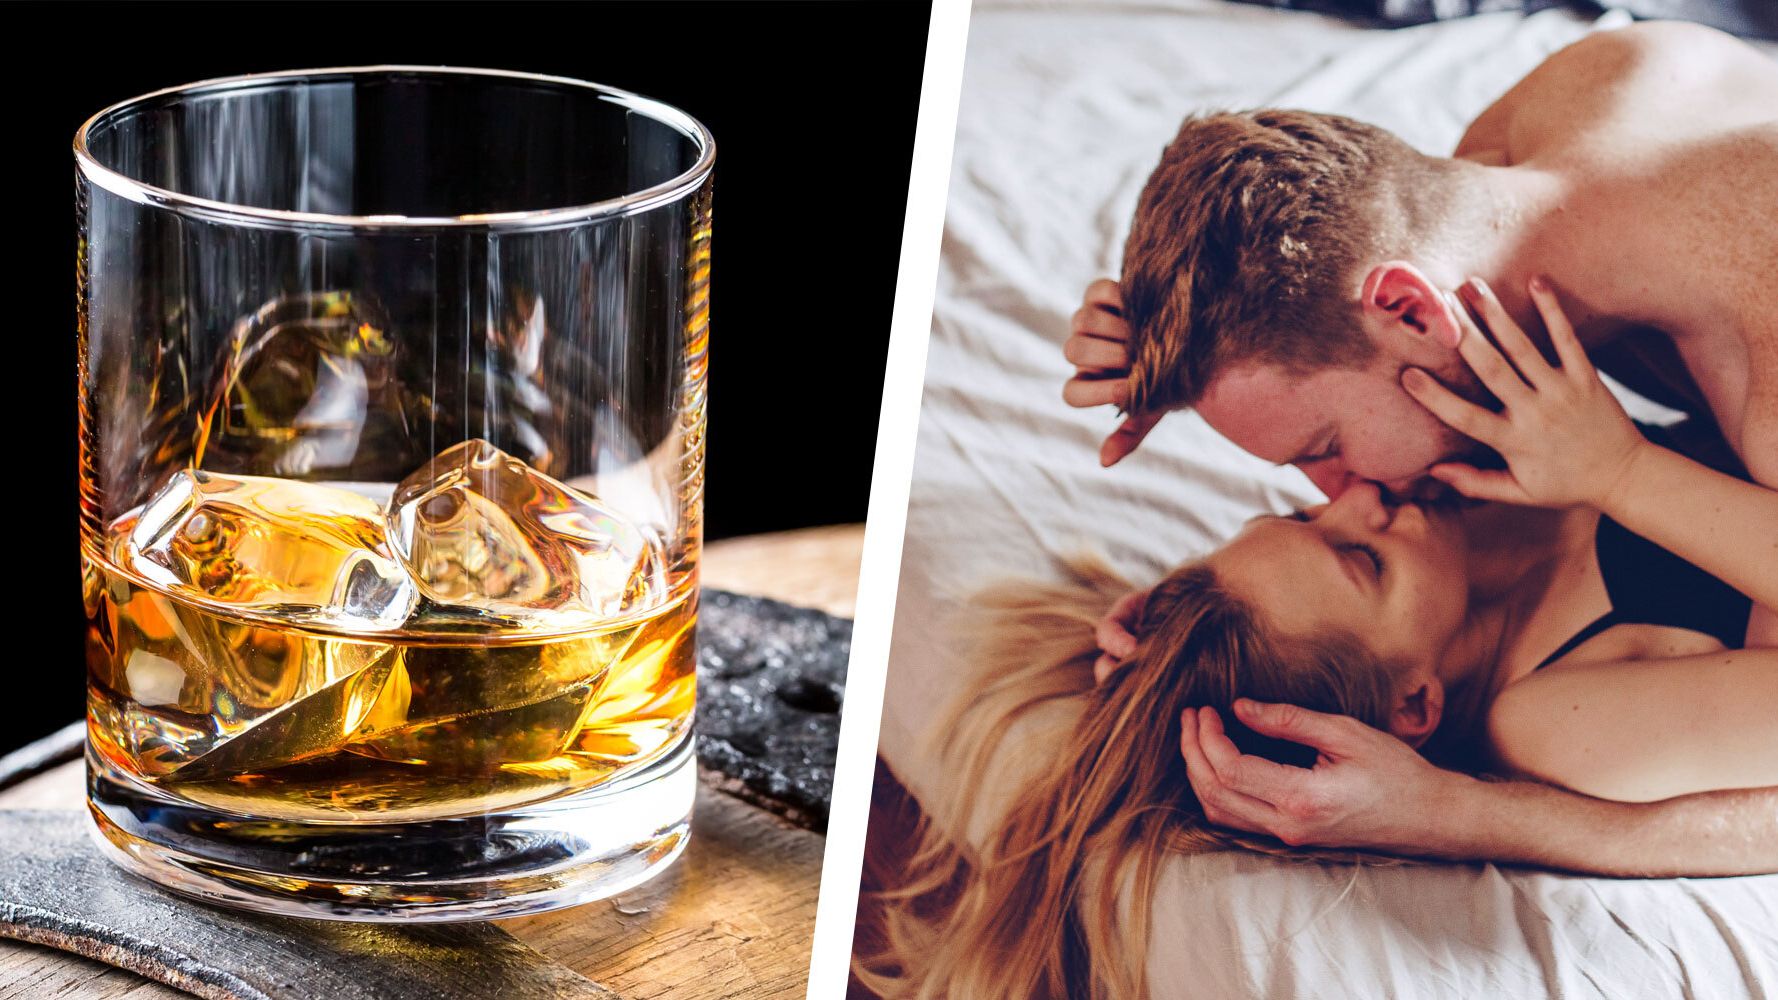 Whiskey Dick Is Real. Here's the Science Behind It.